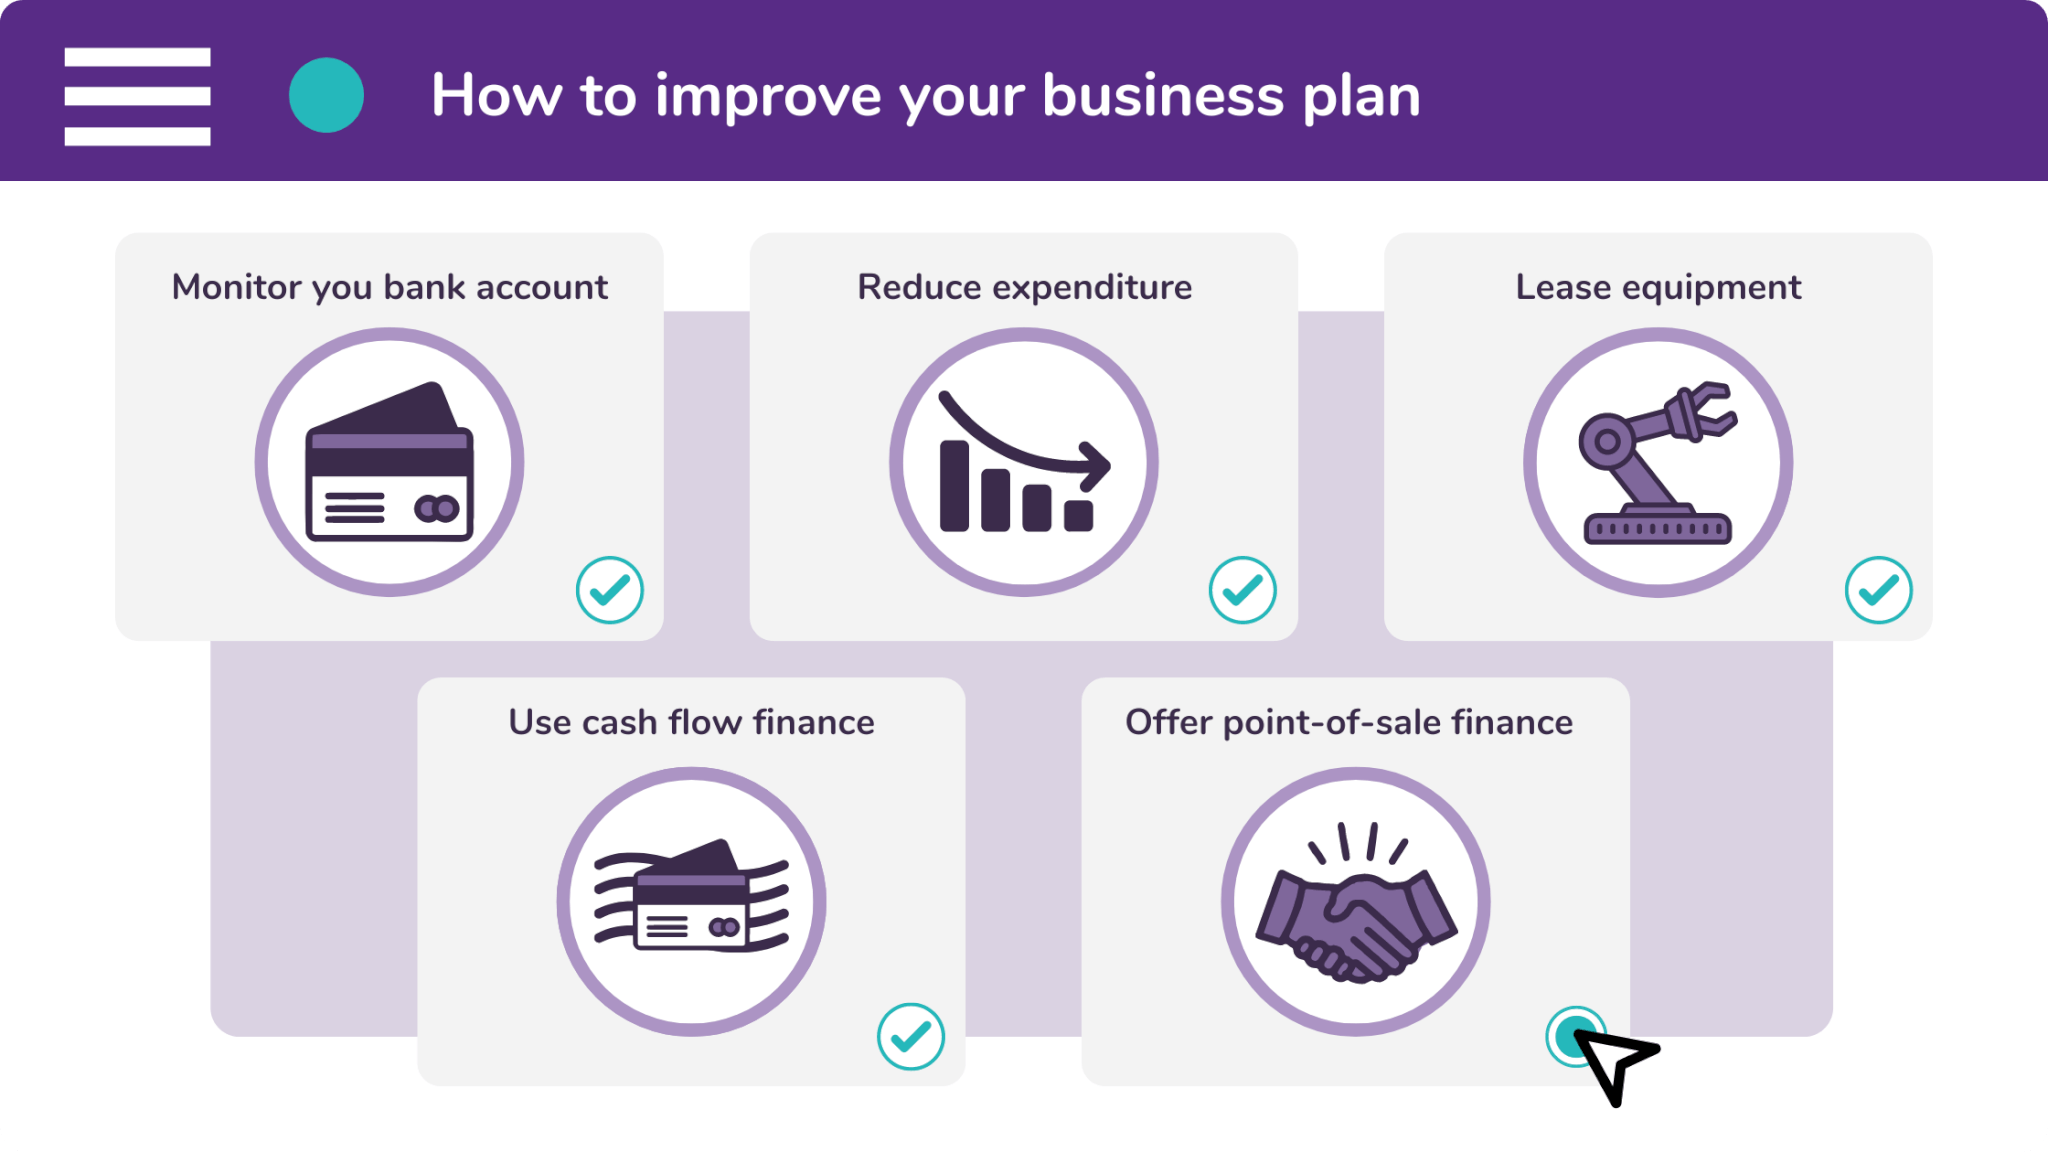 There are five ways in which you can improve your business plan.